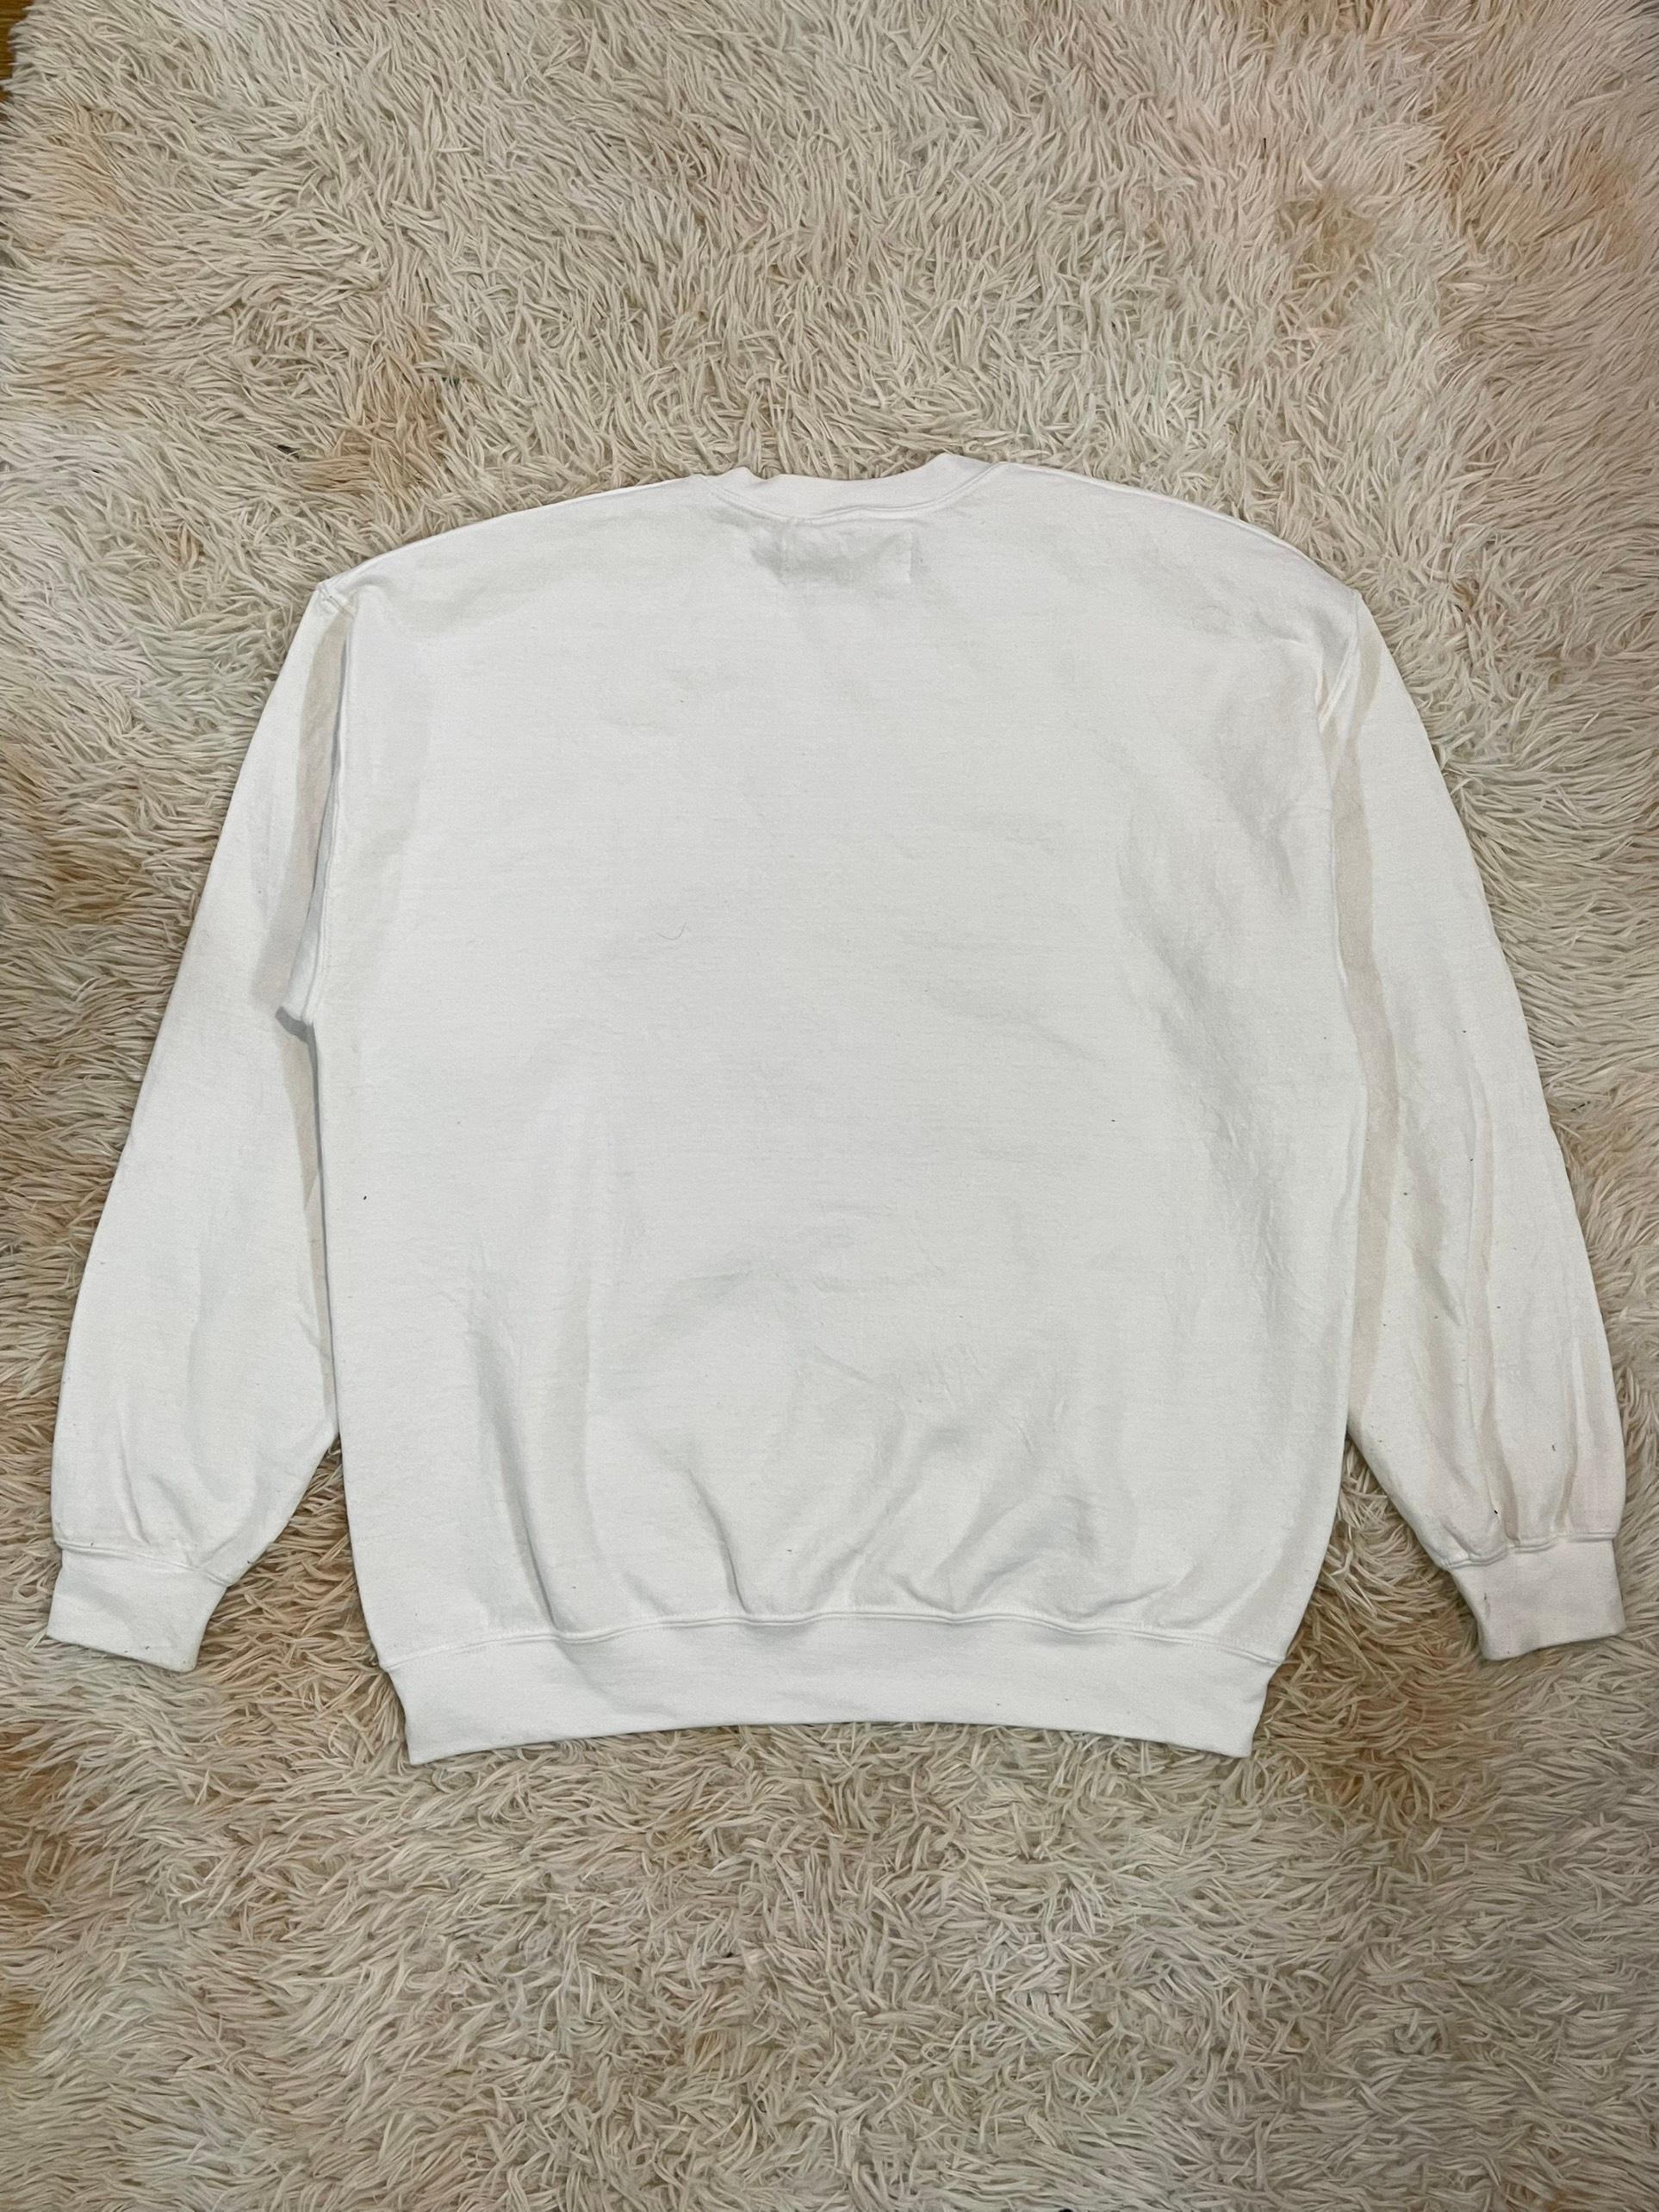 Bjork x Kevin Cummings Photograph Sweatshirt In Excellent Condition For Sale In Seattle, WA